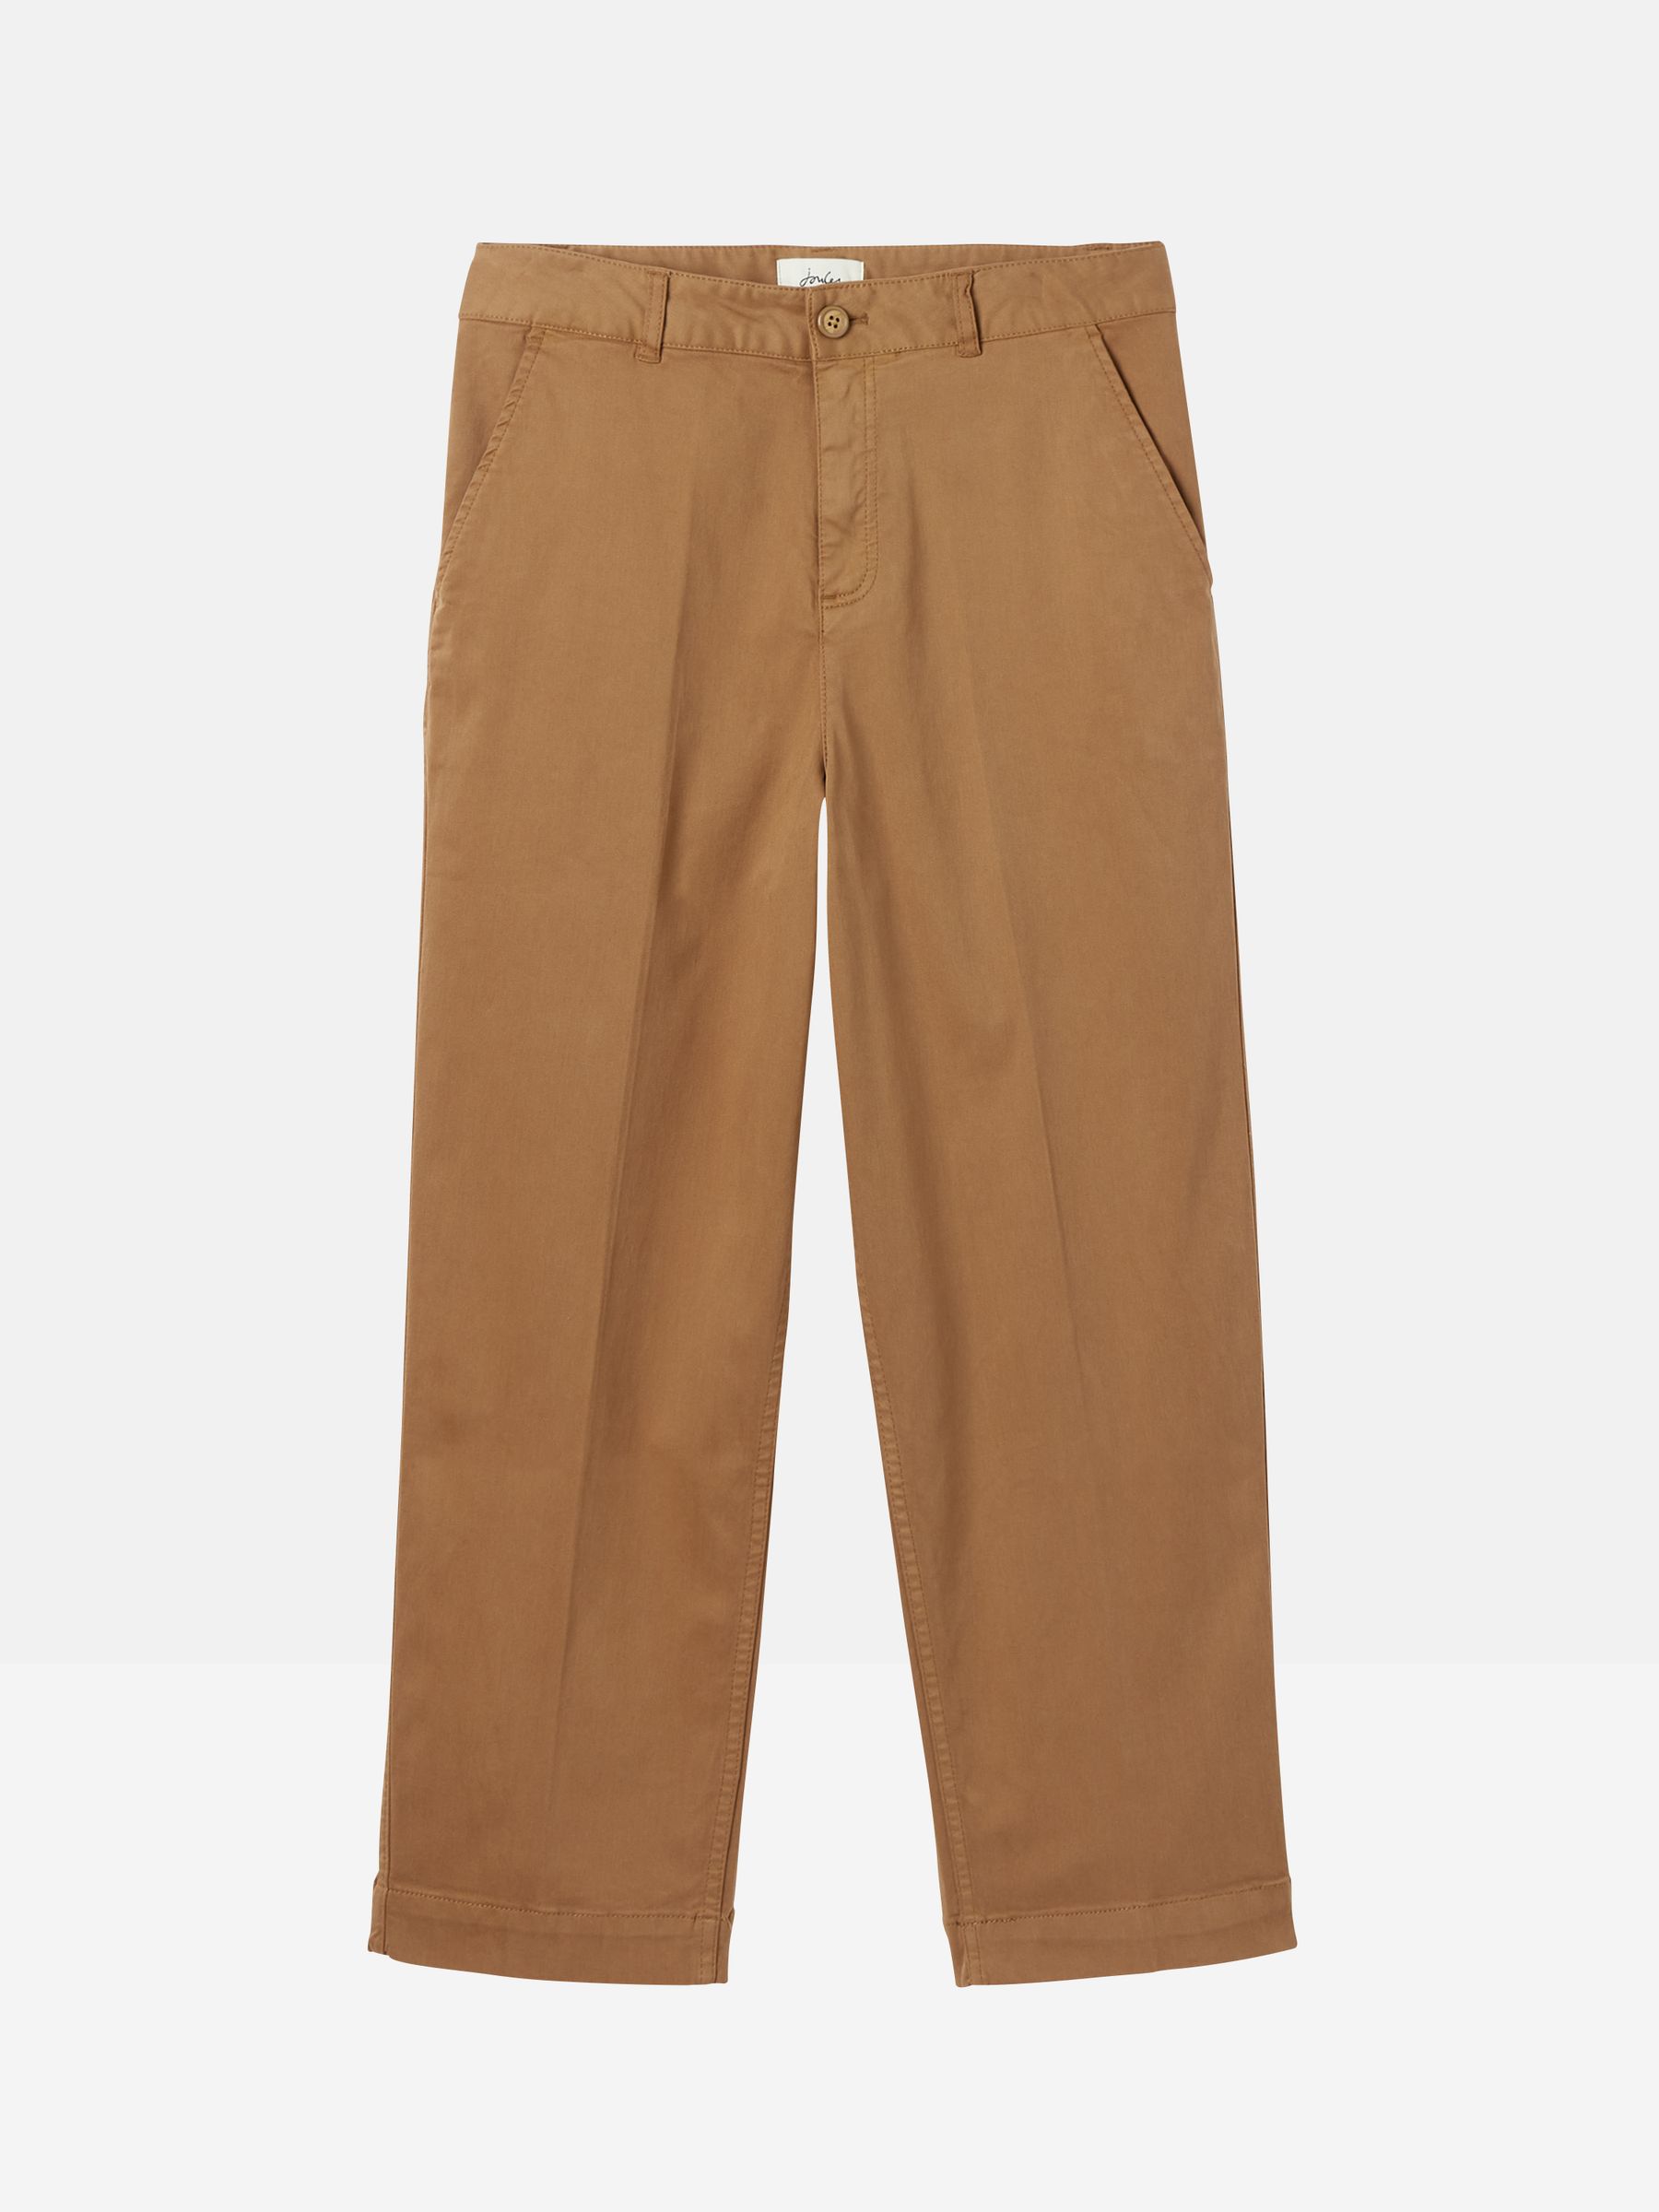 Buy Joules Cedar Straight Leg Chinos from the Joules online shop